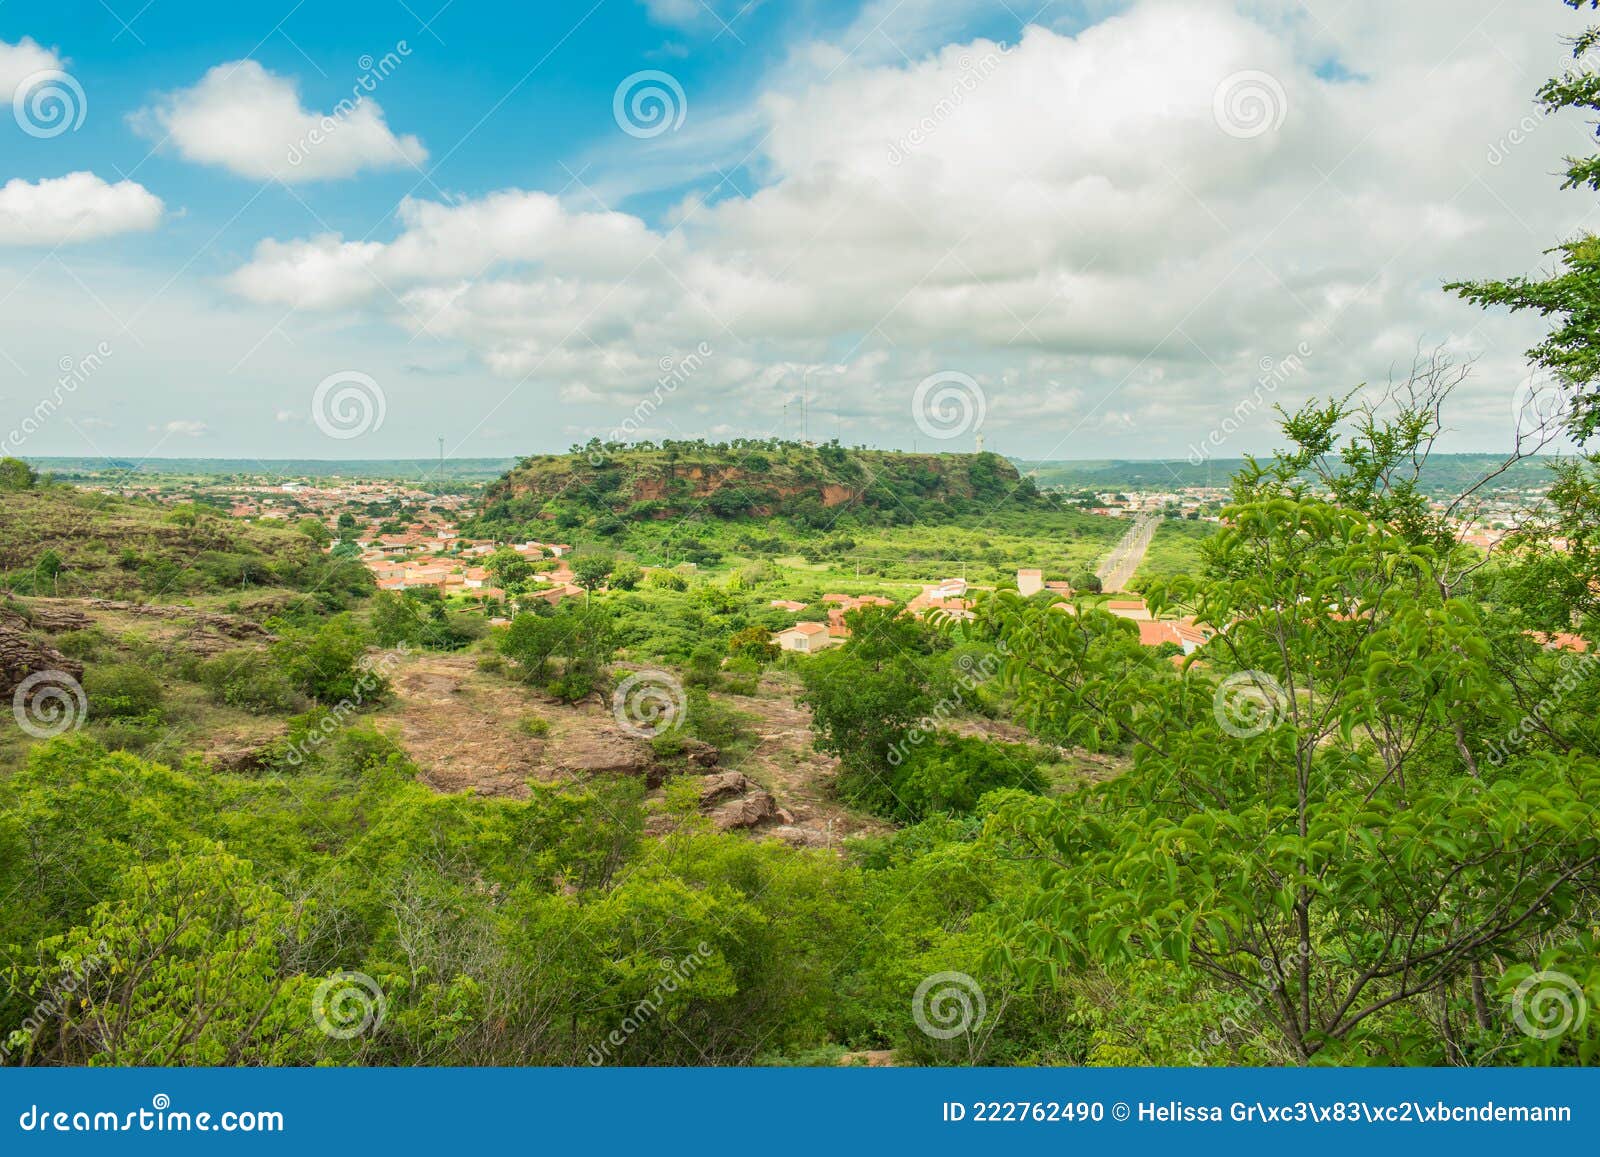 caatinga forest and a view of oeiras, piaui in northeast brazil